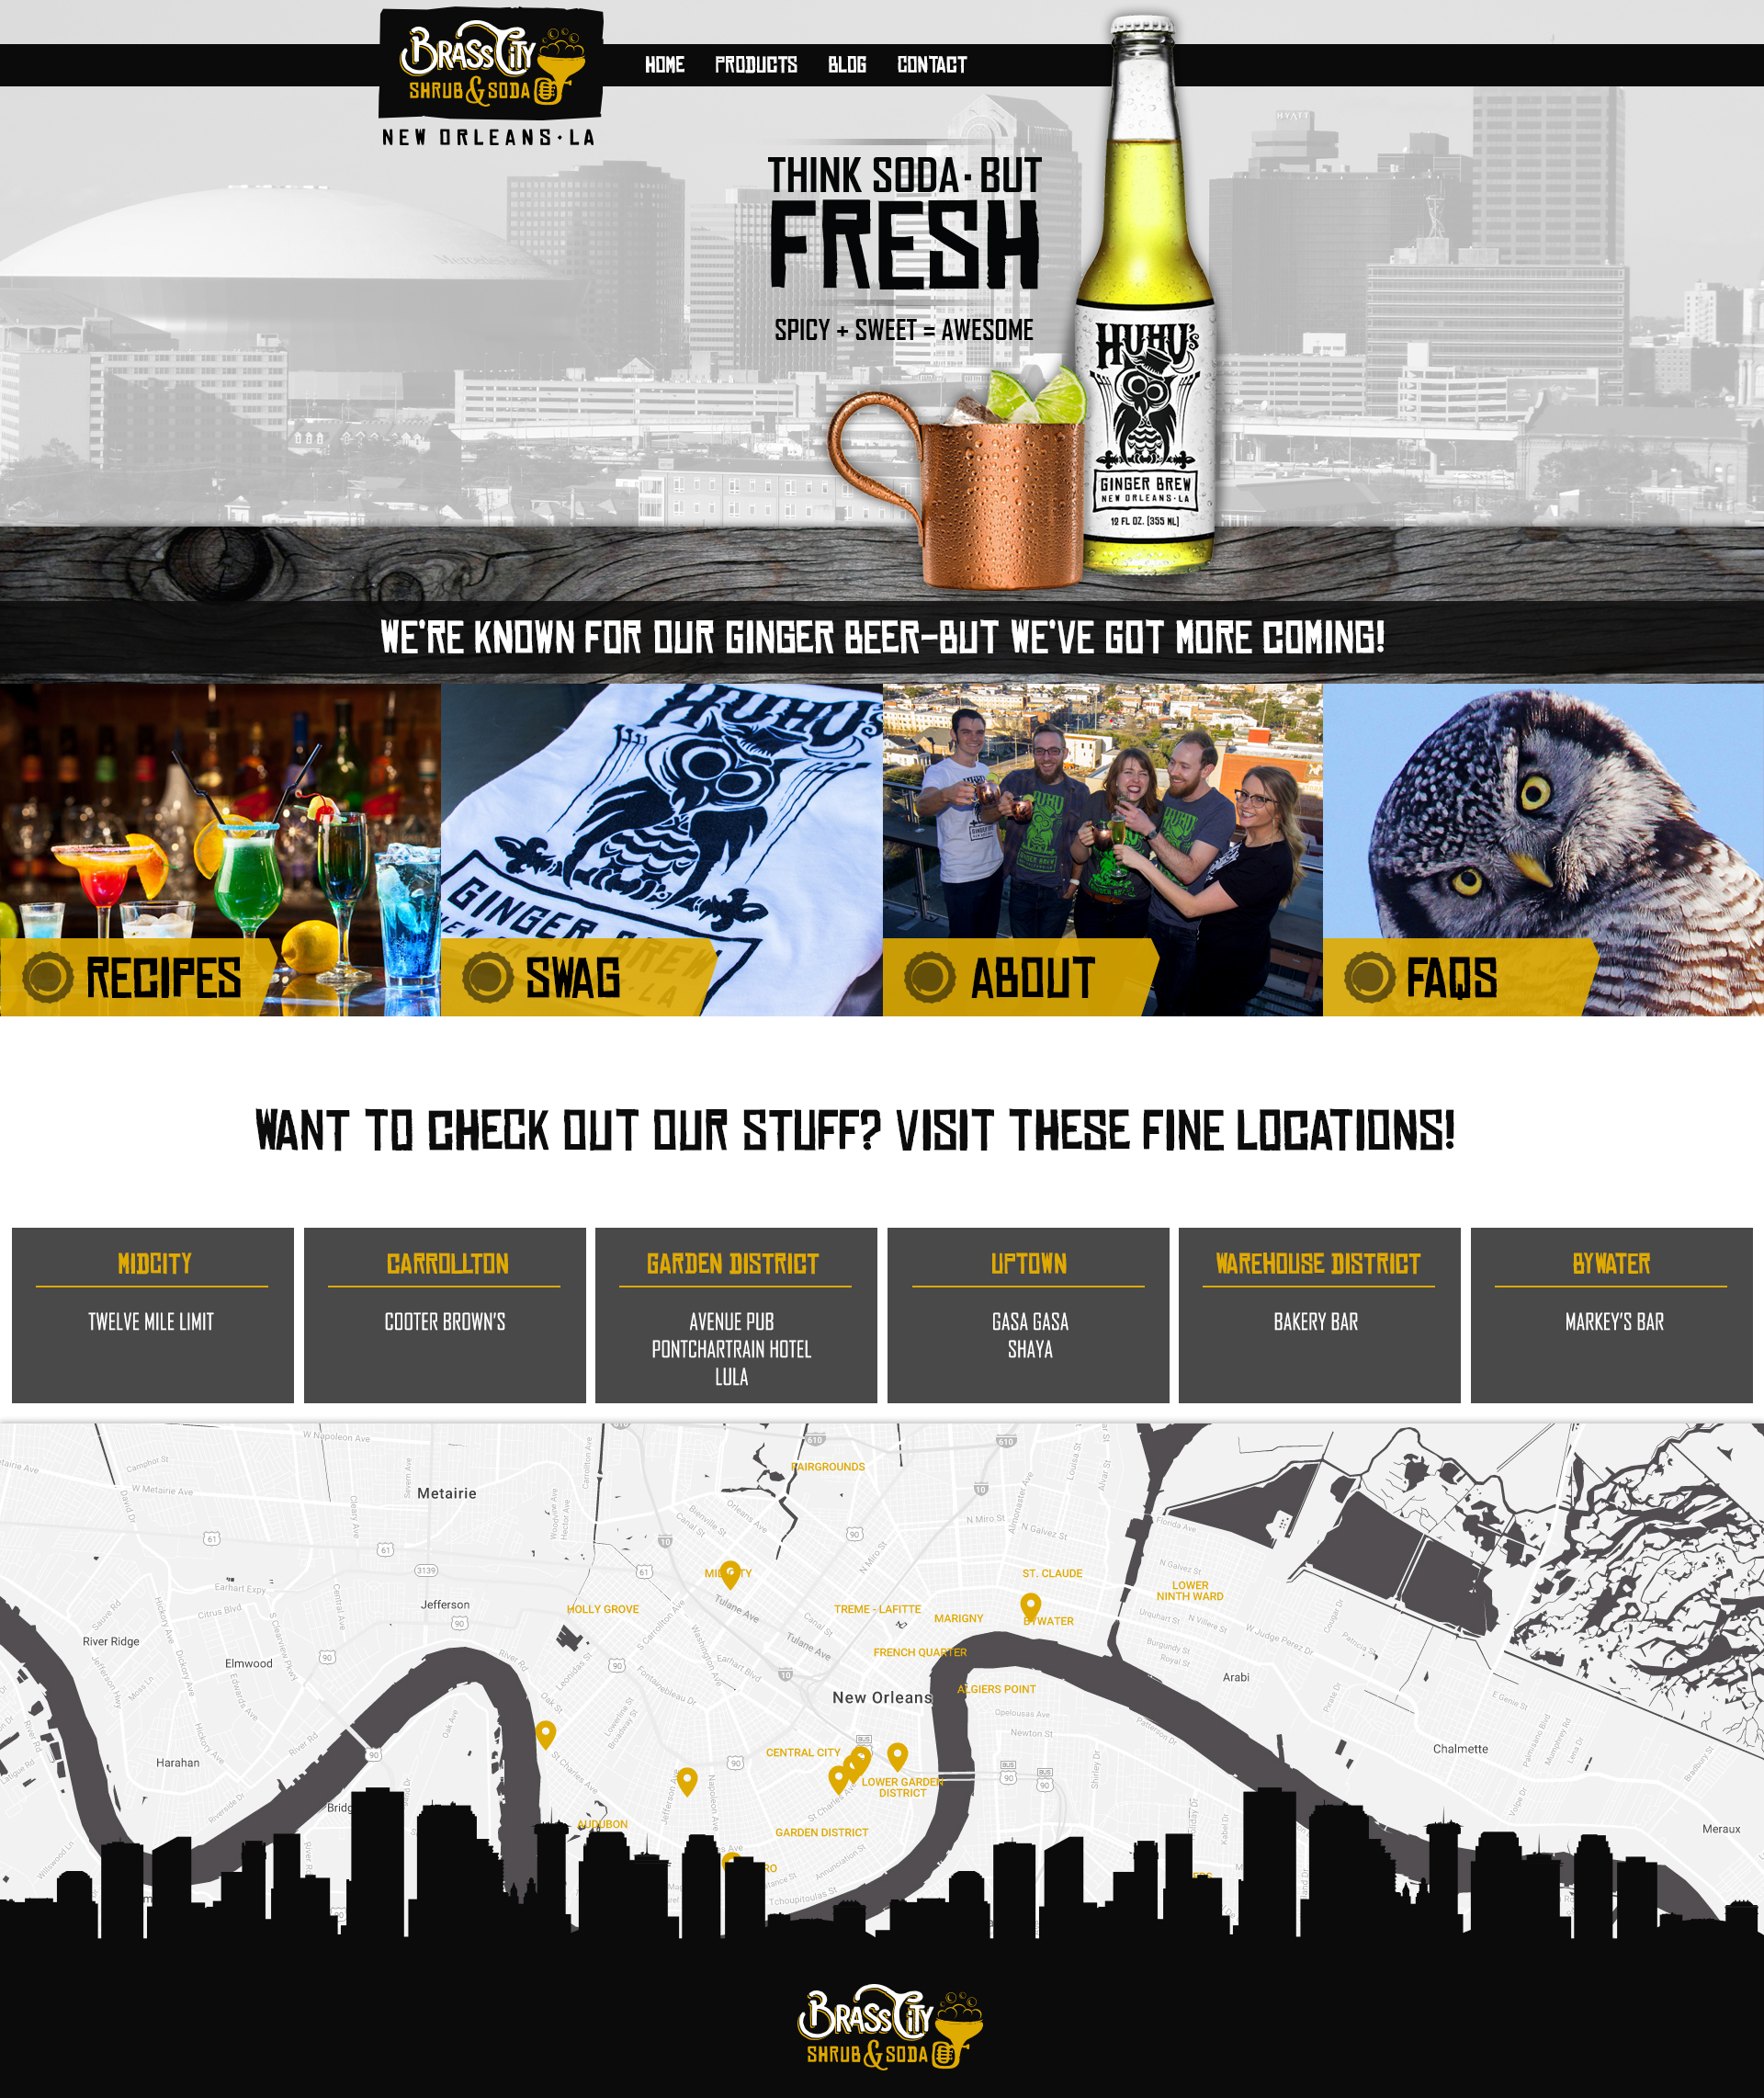 A ginger beer web design screenshot for a company in New Orleans LA